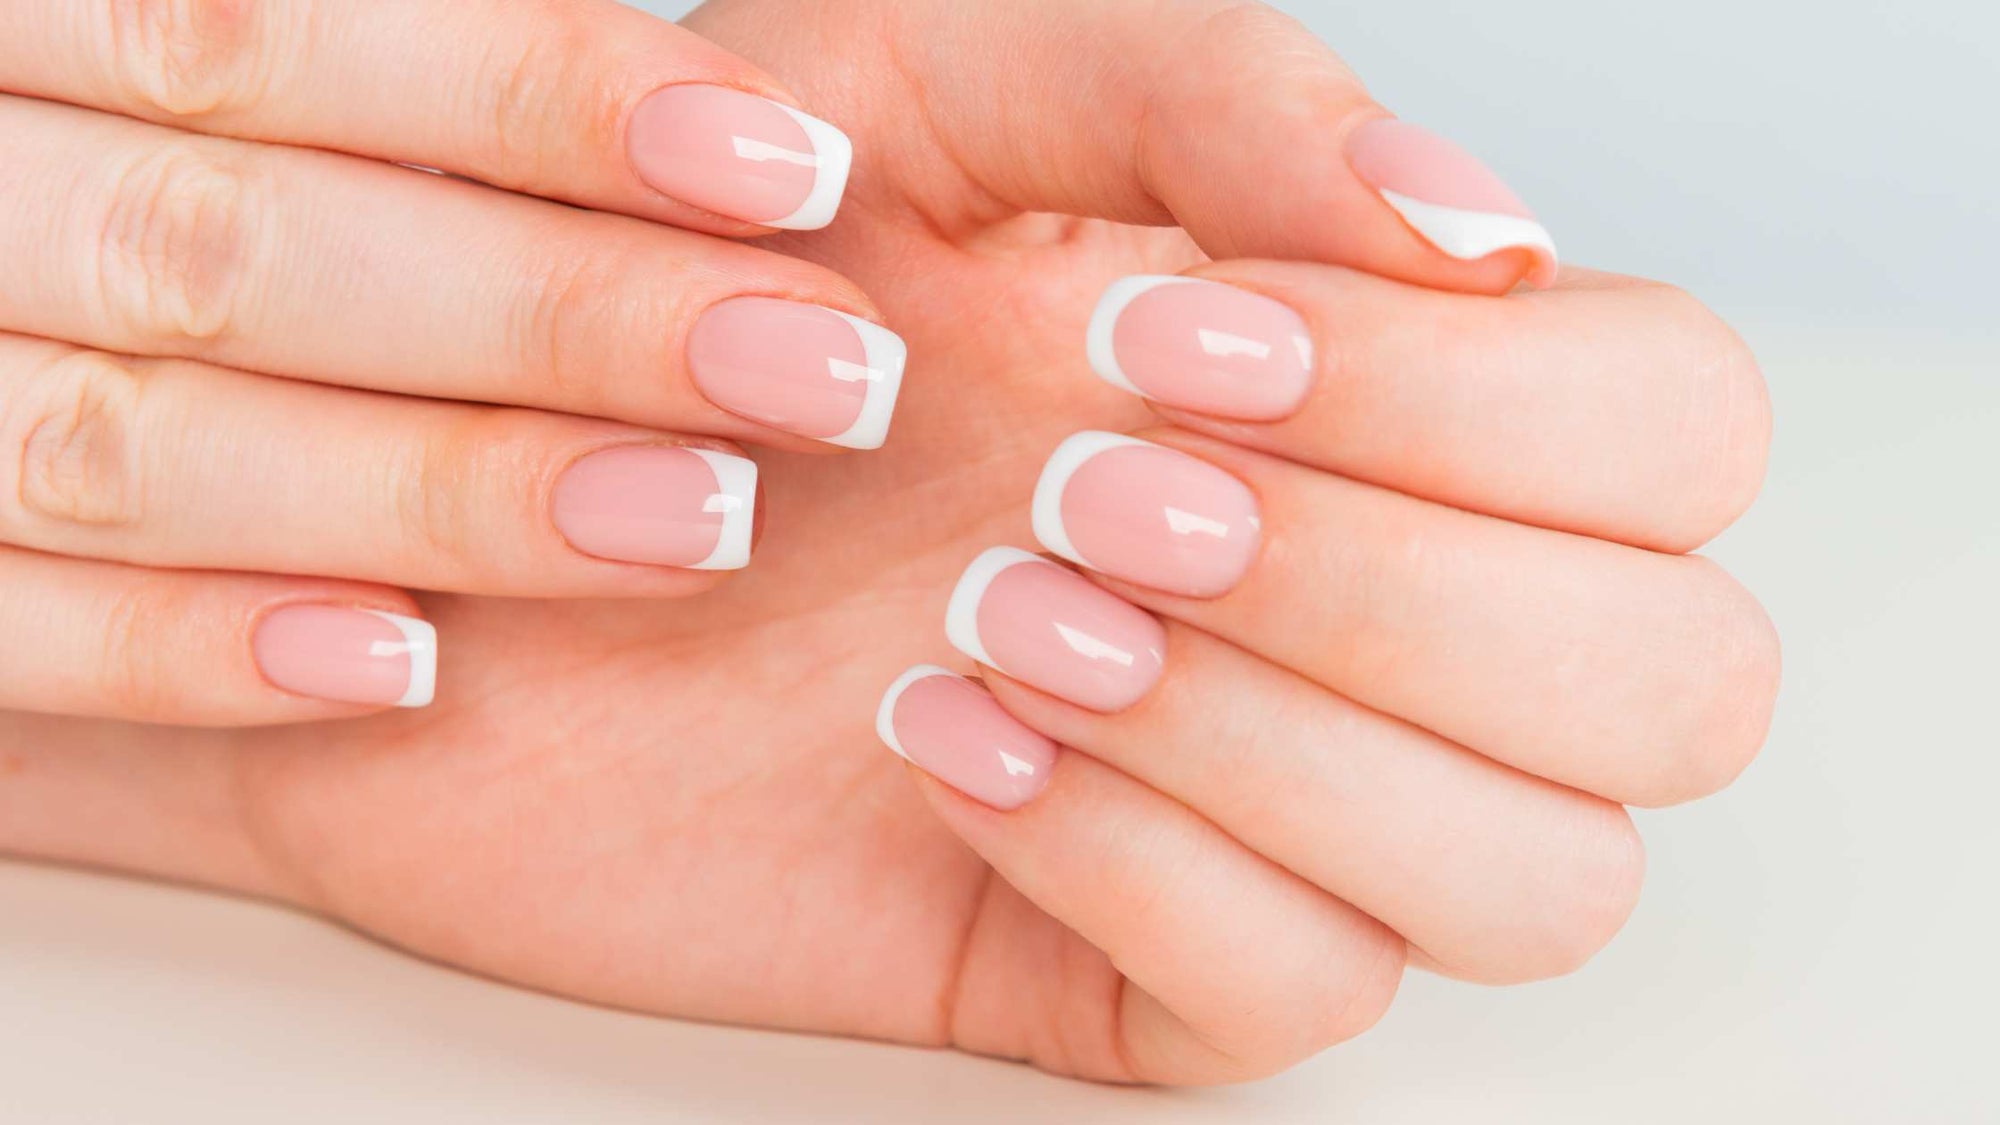 What Are Overlay Nails?